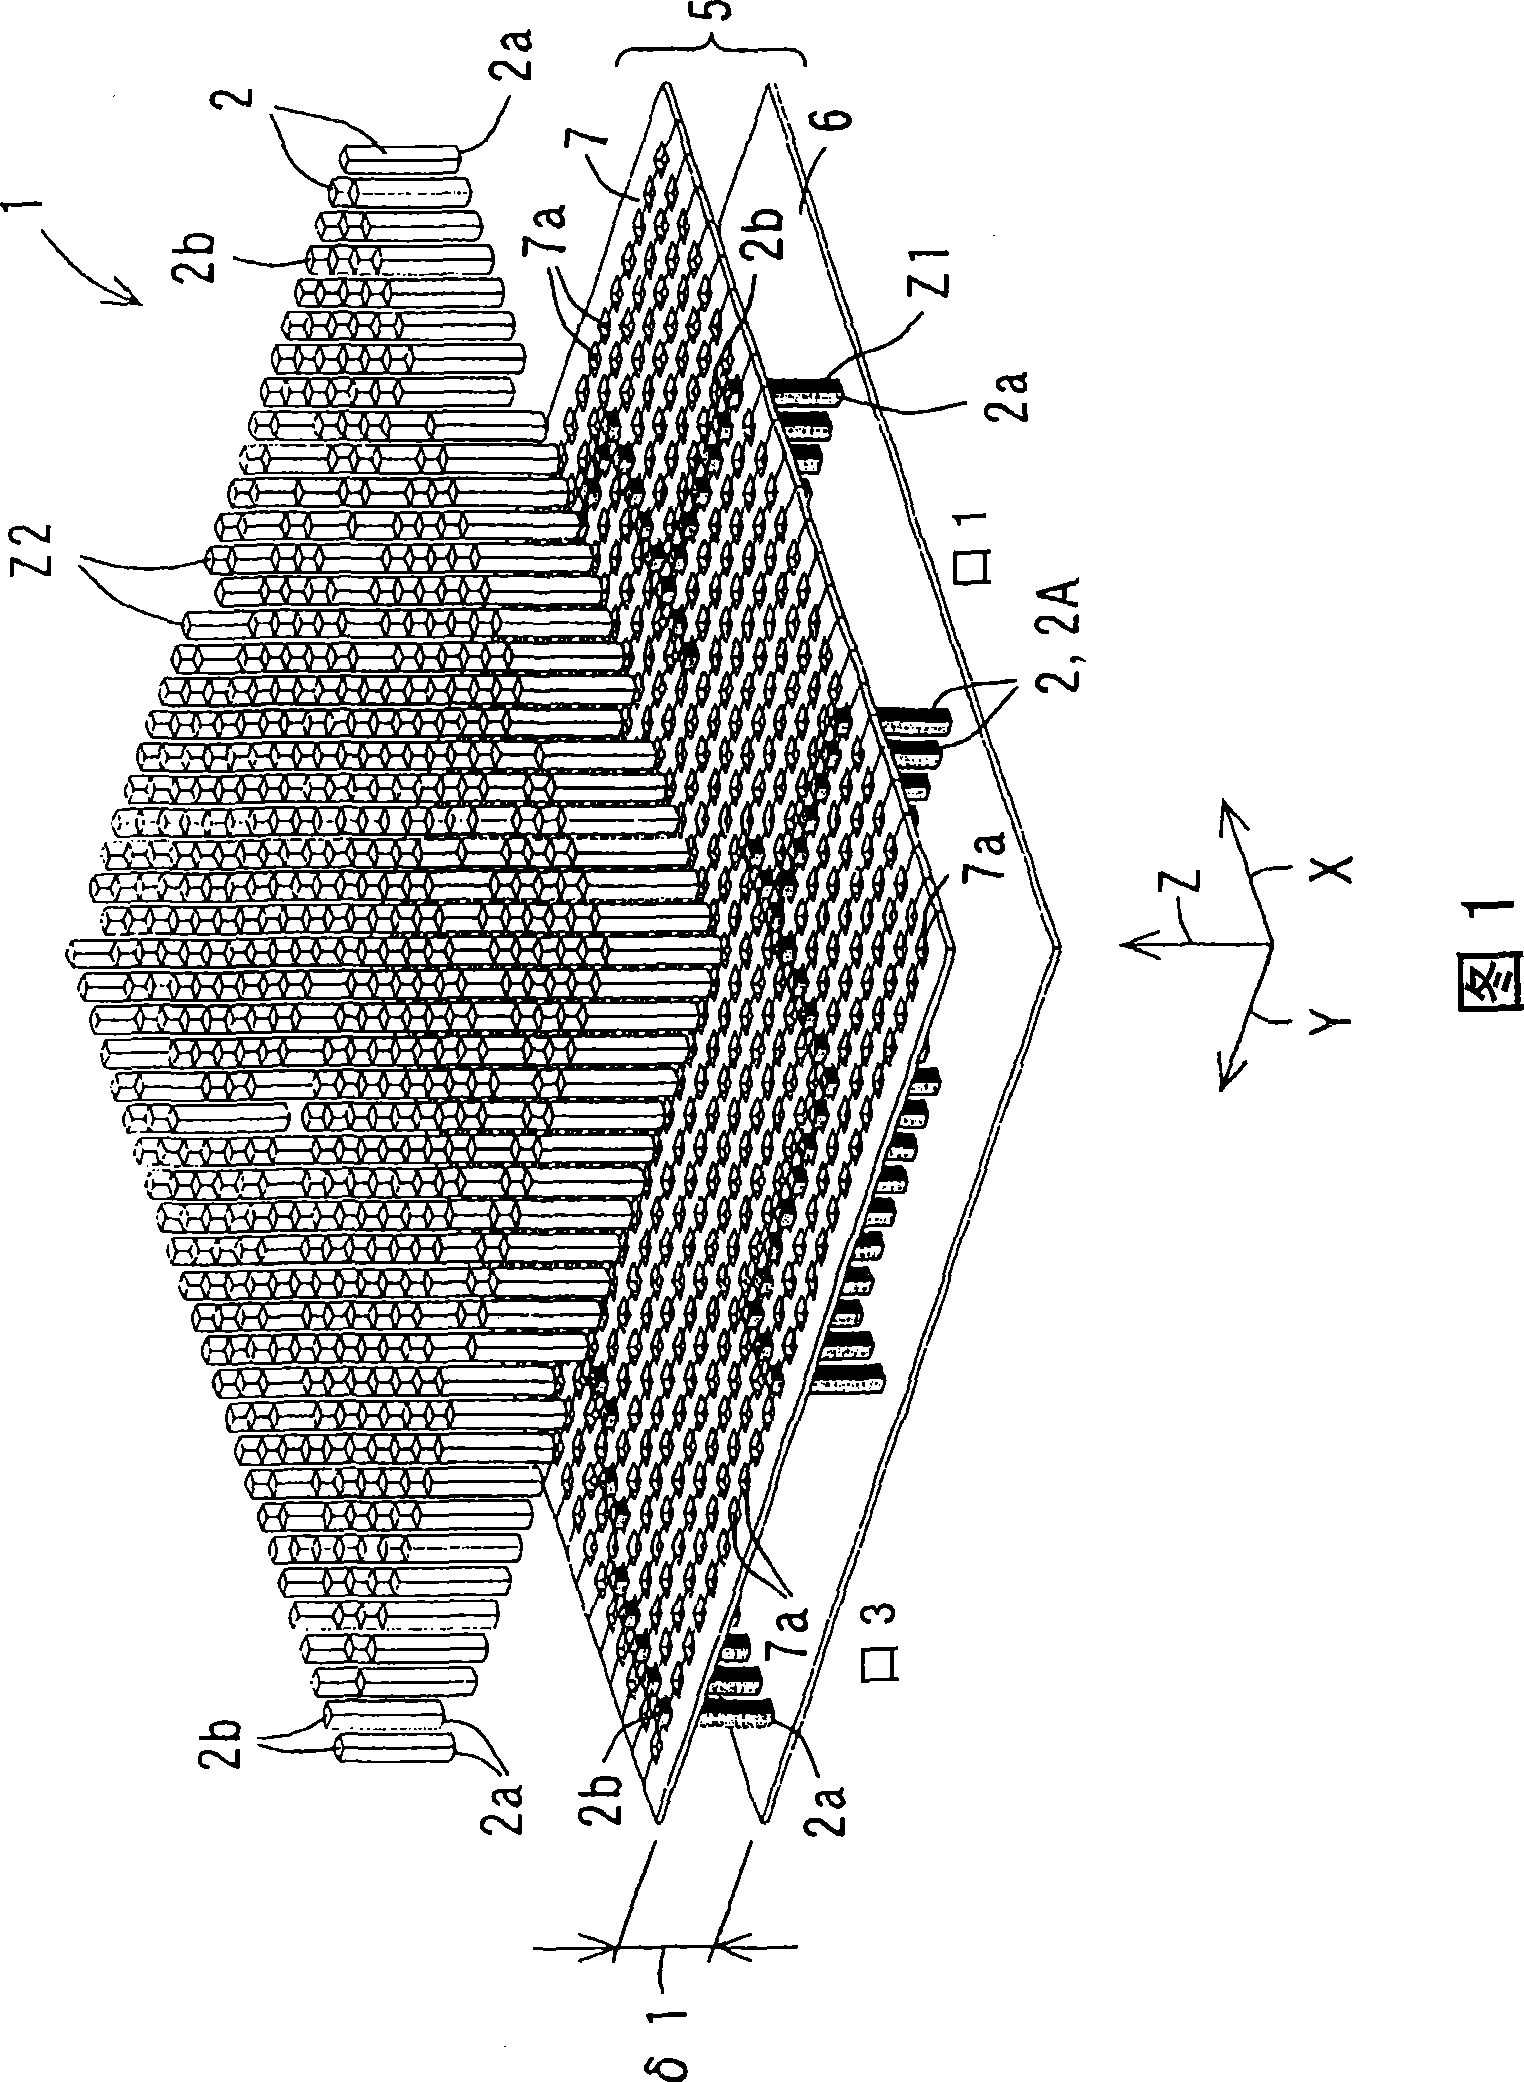 Waveguide forming apparatus, dielectric line forming apparatus, pin structure and high frequency circuit